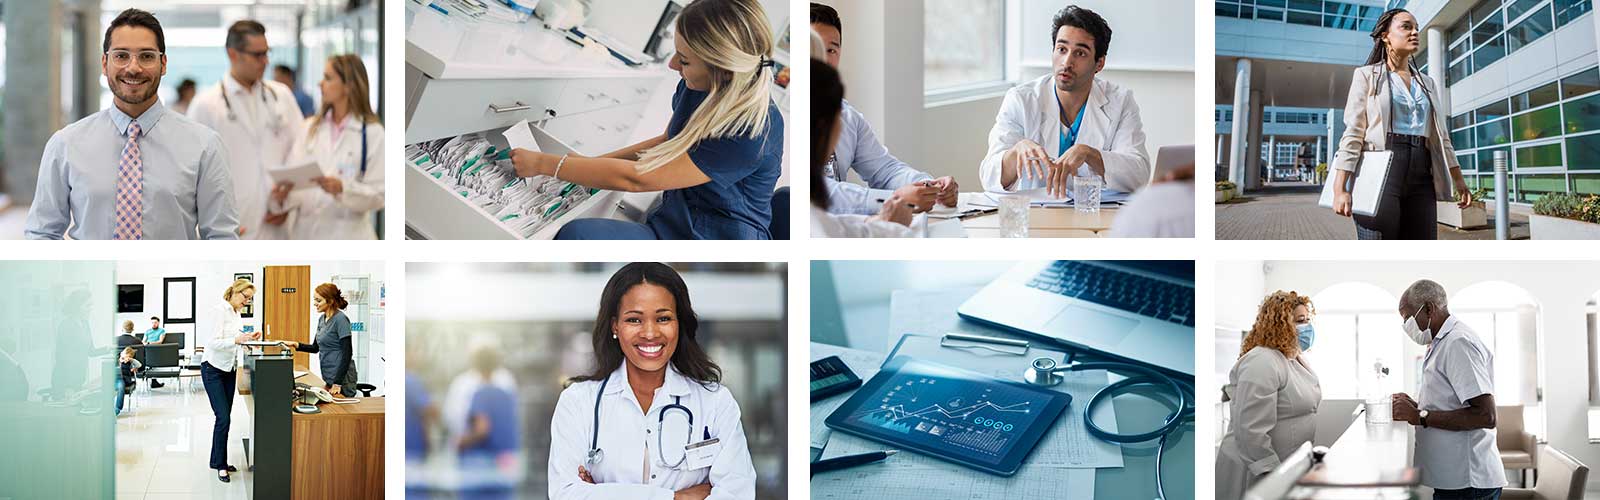 A selection of images of people various health care administration professions